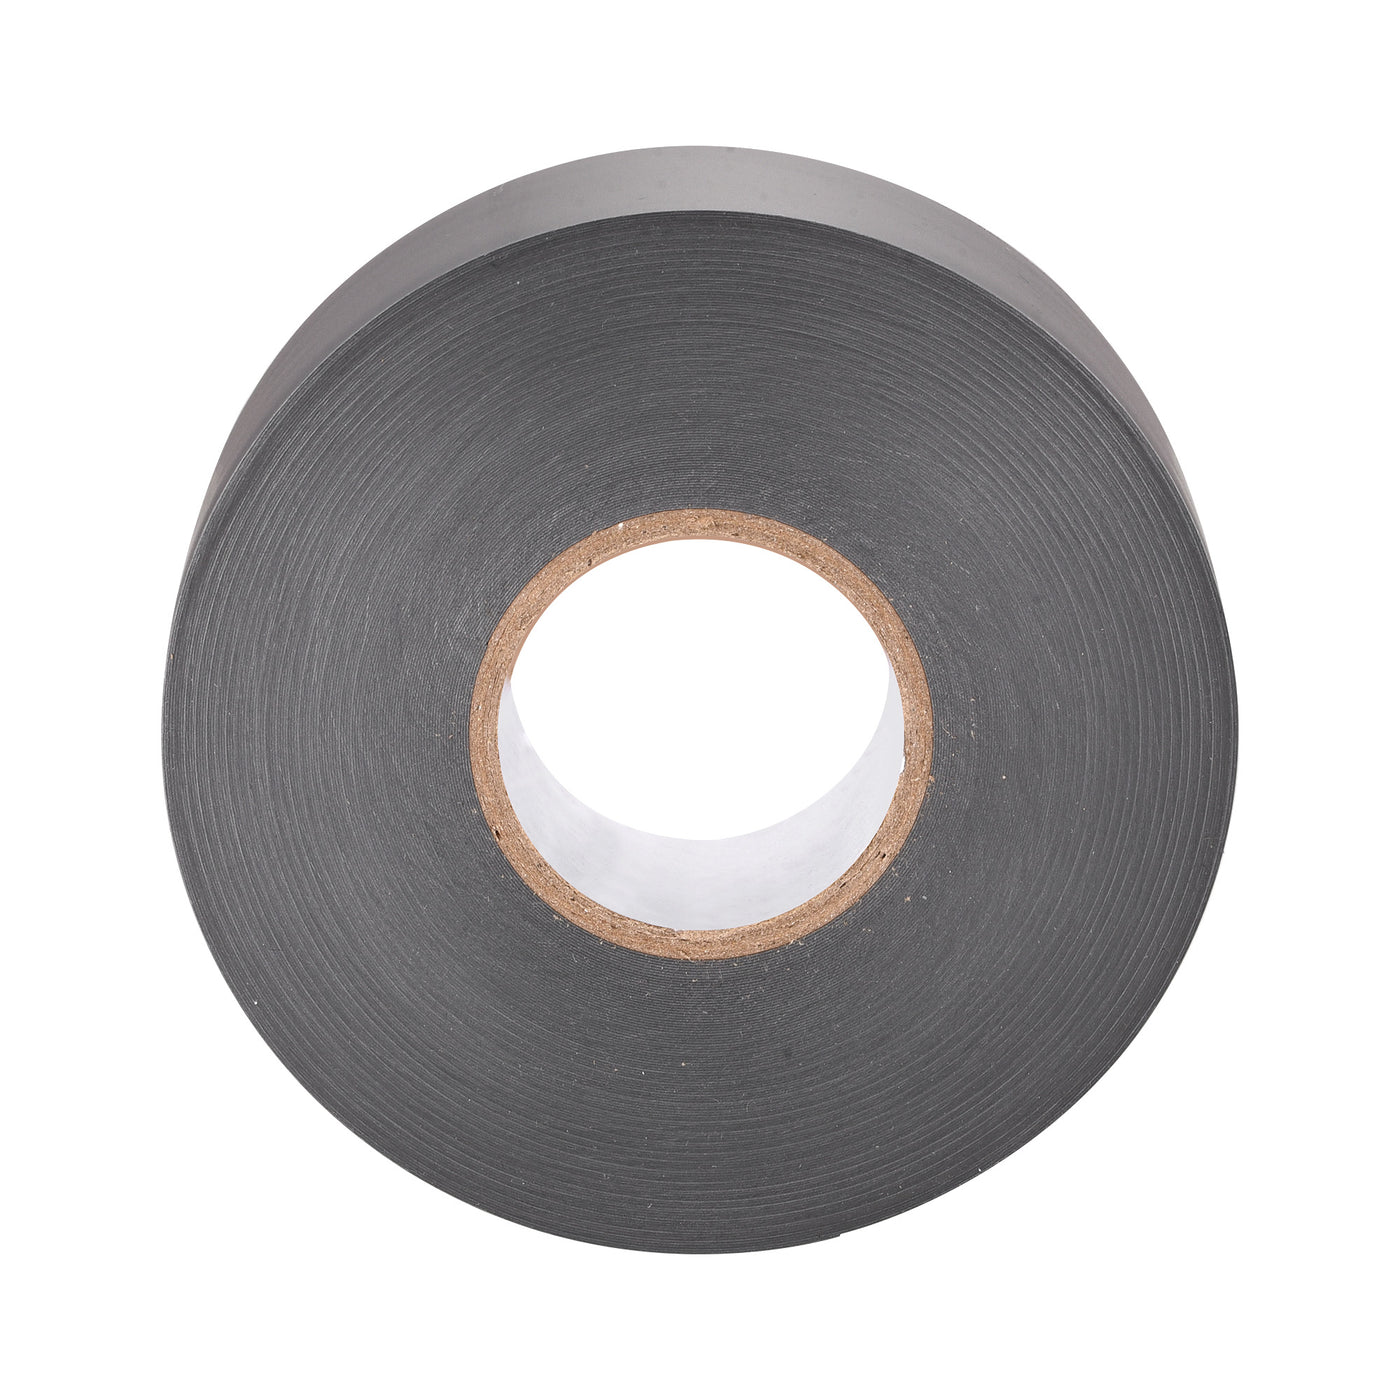 uxcell Uxcell Insulating Tape 50mm Width 26M Long 0.26mm Thick PVC Electrical Tape Grey